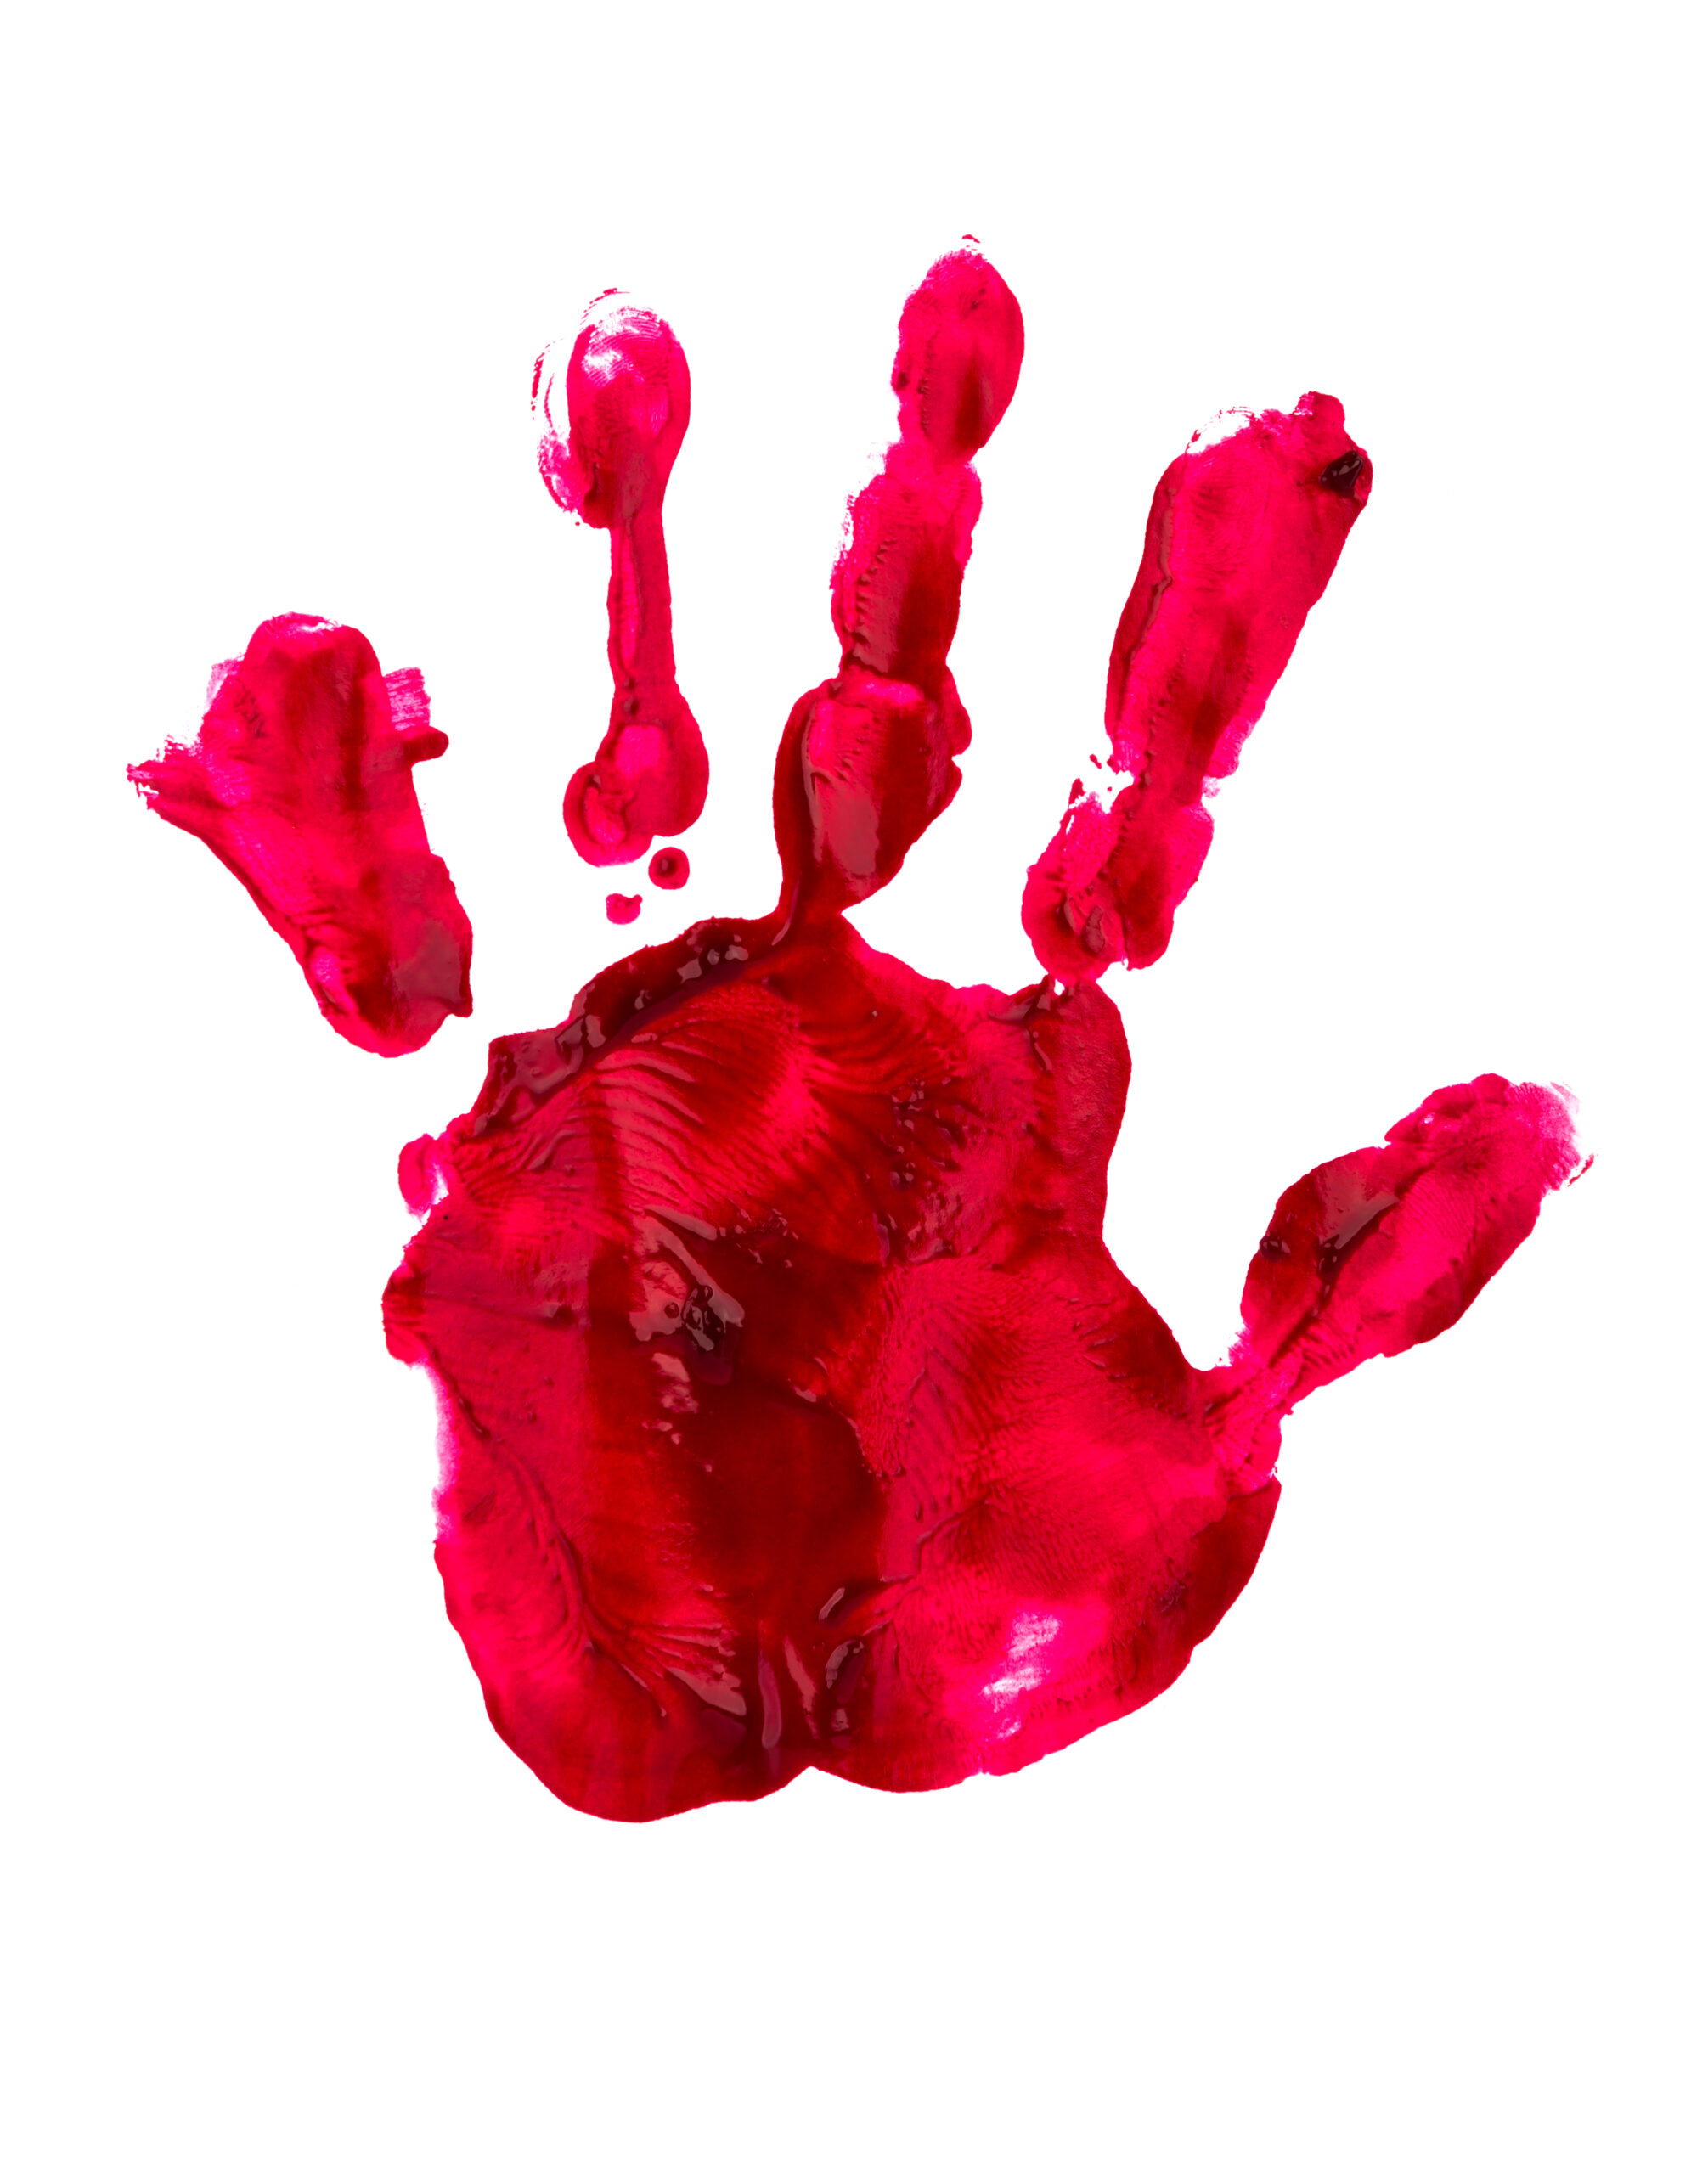 Bloody print of a hand and fingers on white wall